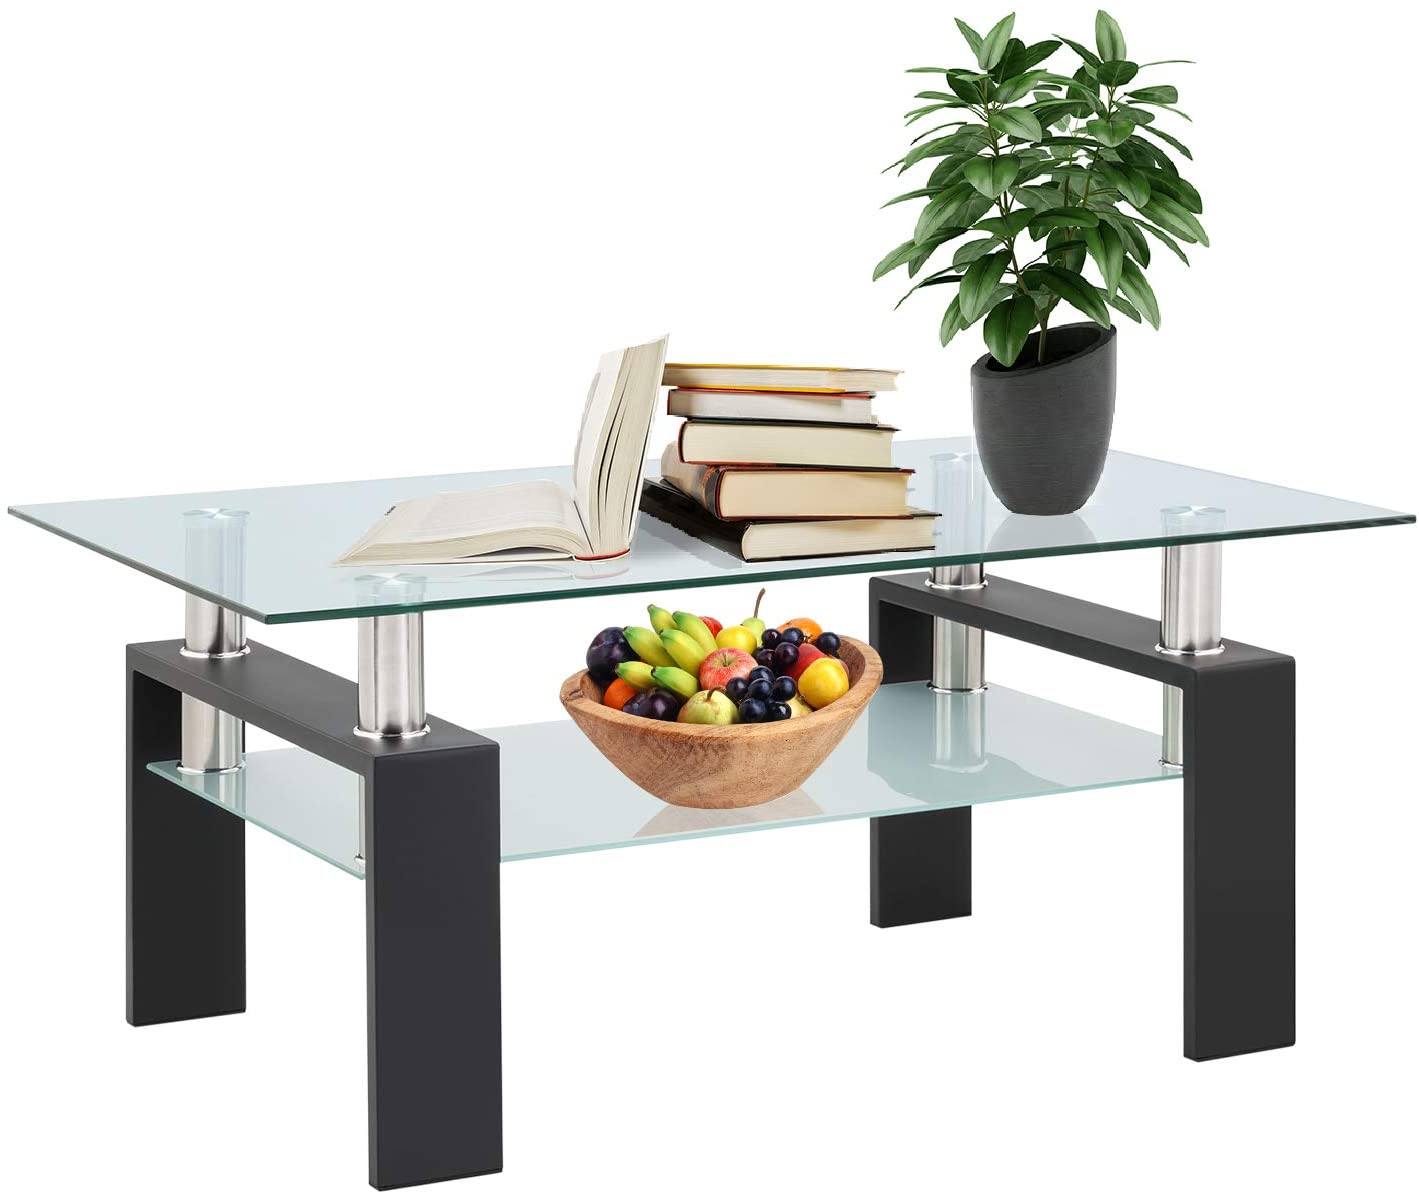 Glass Coffee Table with Lower Shelf, Clear Rectangle Glass Coffee Table, Modern Coffee Table with Metal Legs, Rectangle Center Table Sofa Table Home Furniture for Living Room, L5509 - image 2 of 9